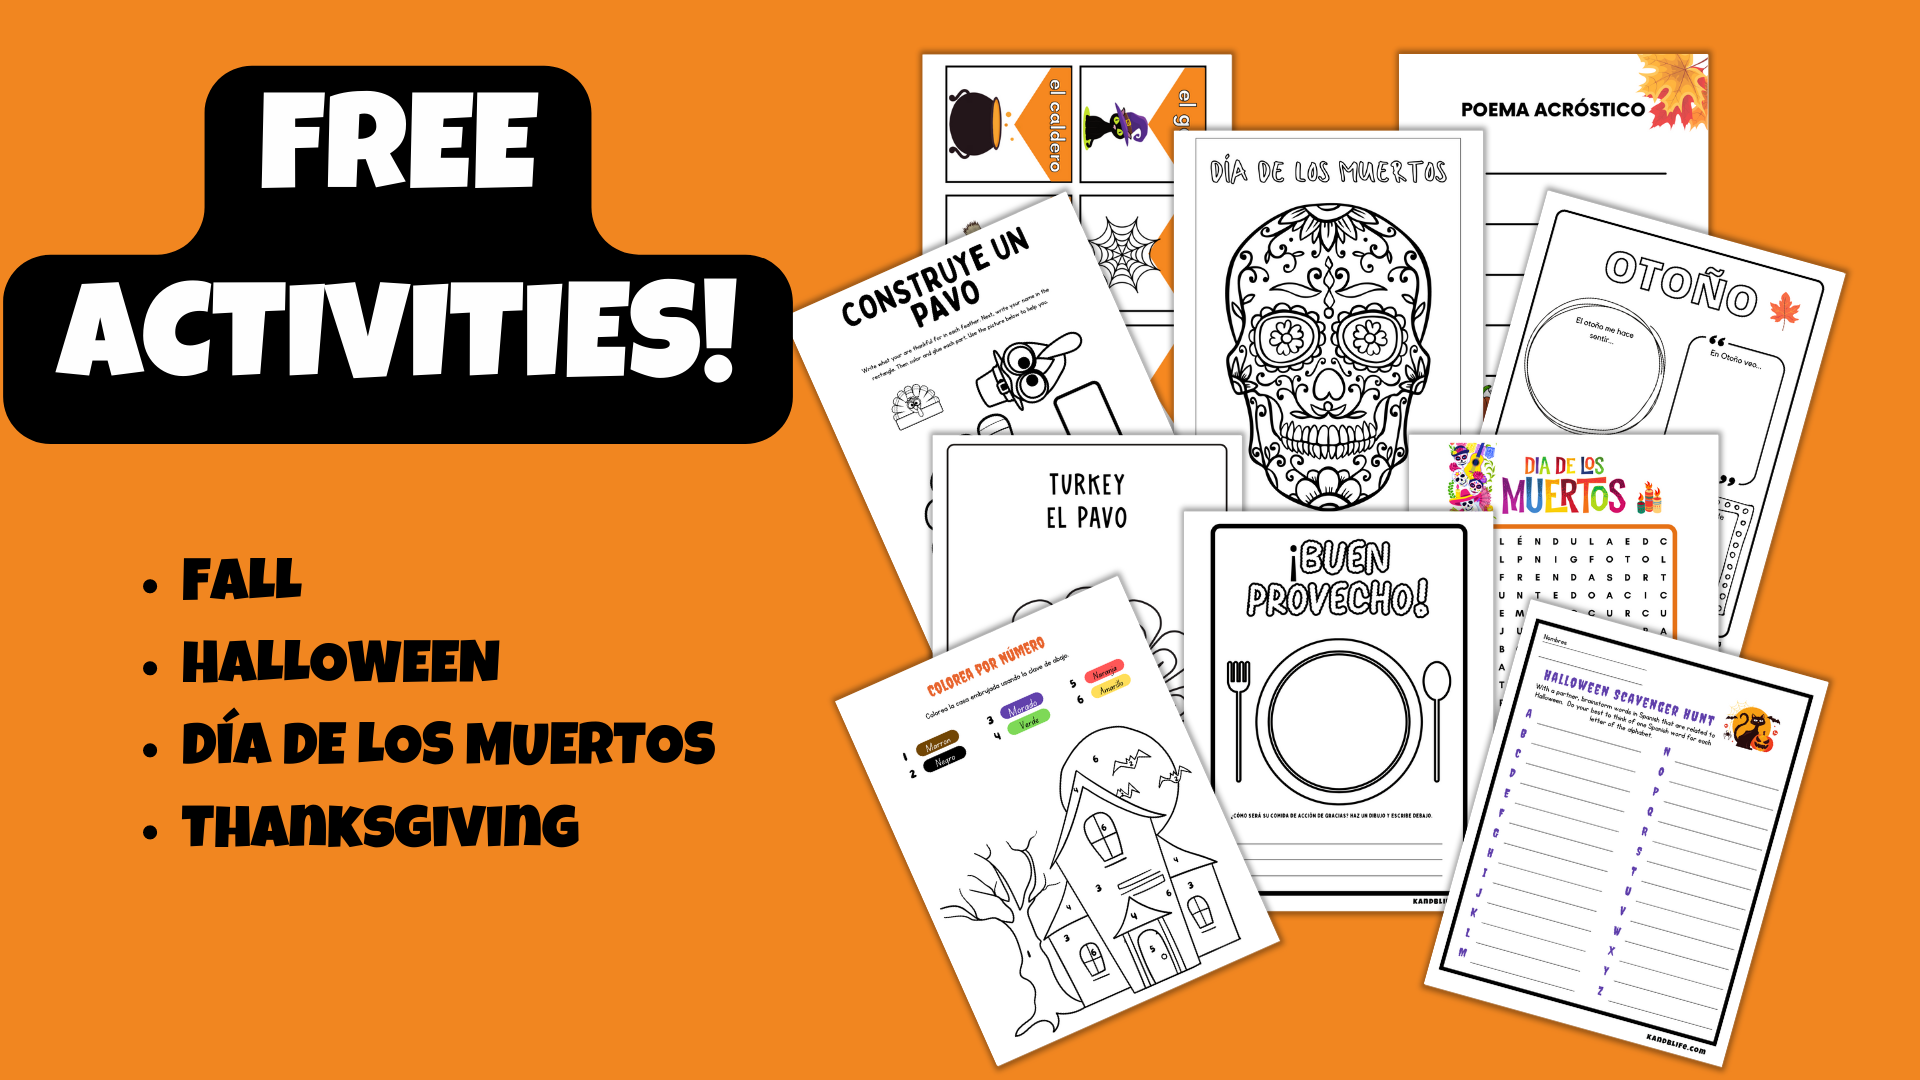 Free Spanish Activities for Fall!